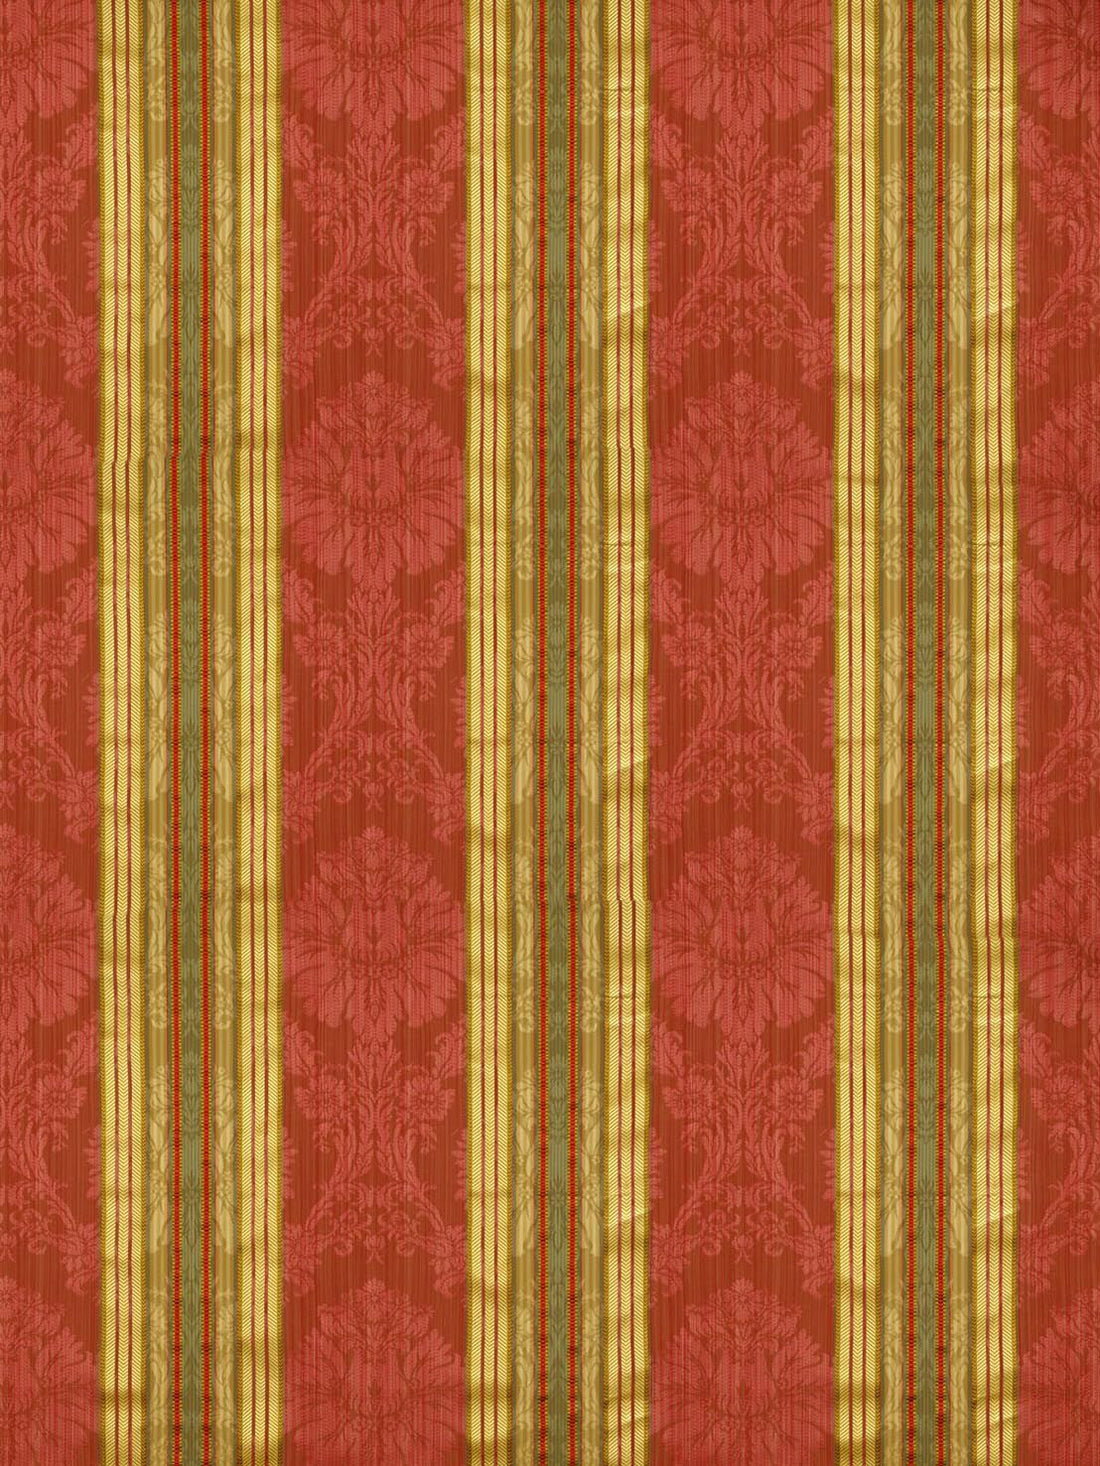 Santa Margarita fabric in multi on rose color - pattern number SC 000326166 - by Scalamandre in the Scalamandre Fabrics Book 1 collection